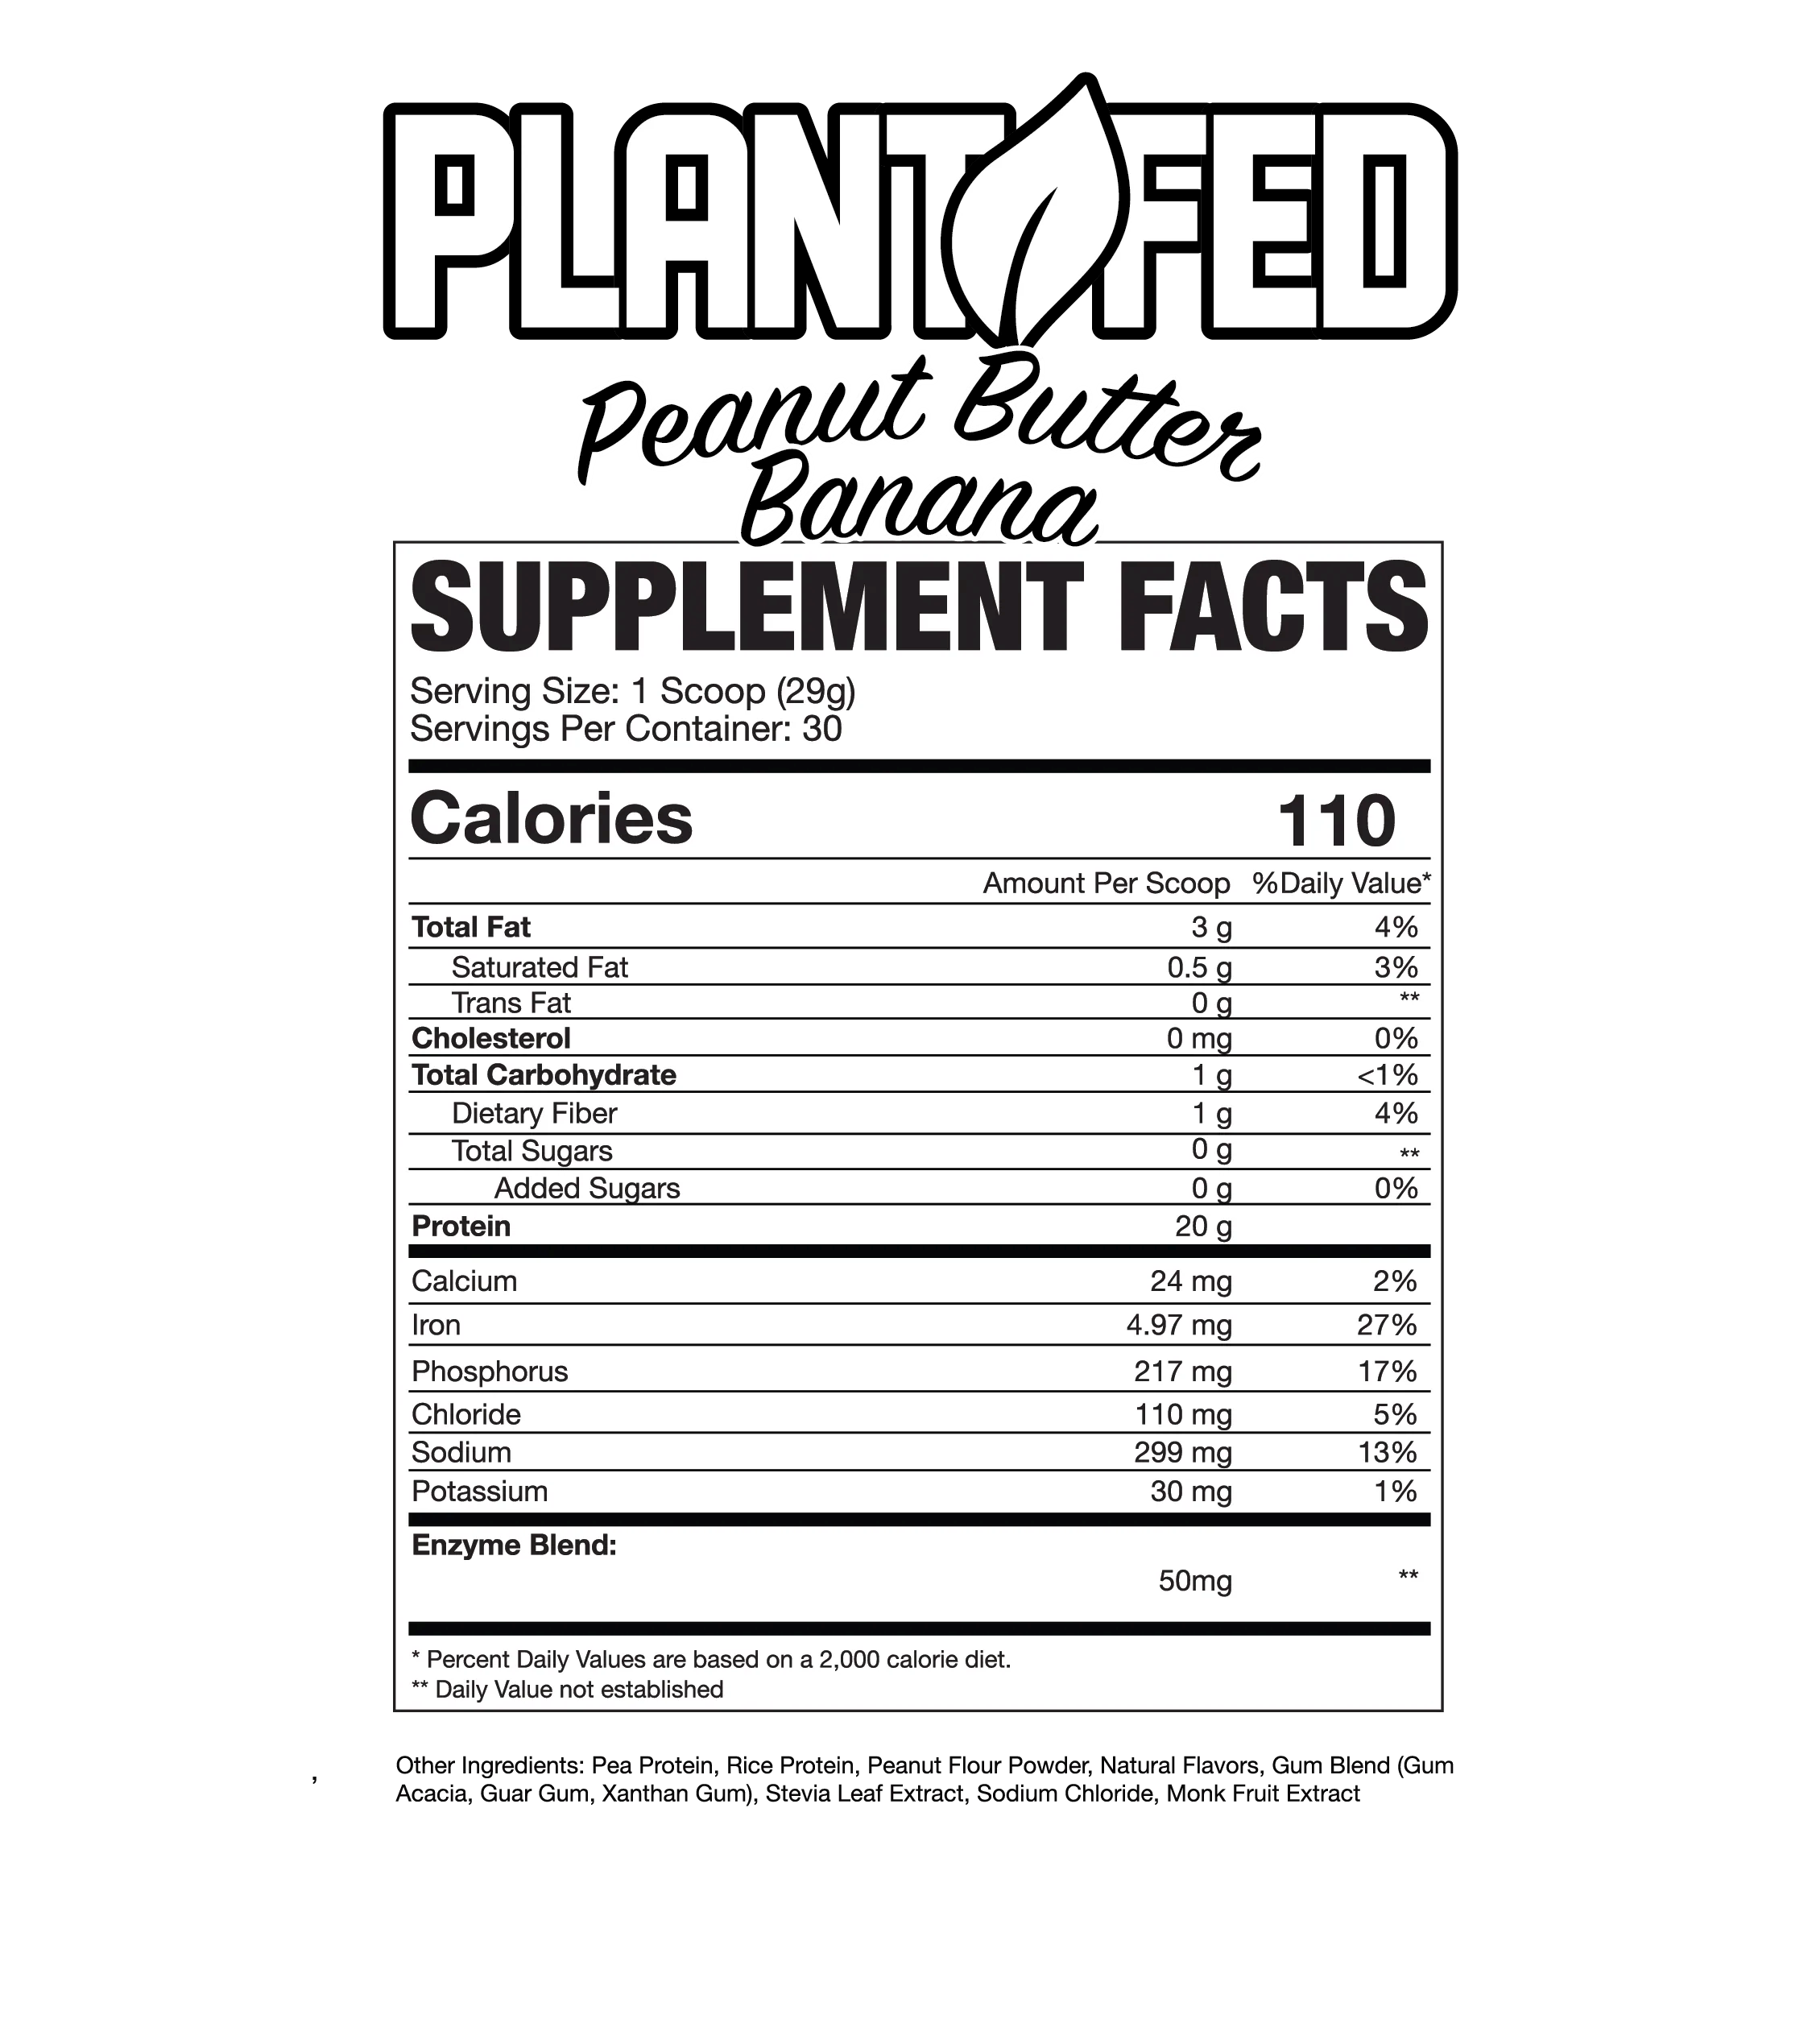 Nutritional label for Plant Fed's Peanut Butter Banana supplement with 30 servings, consisting of various nutrients and proteins.